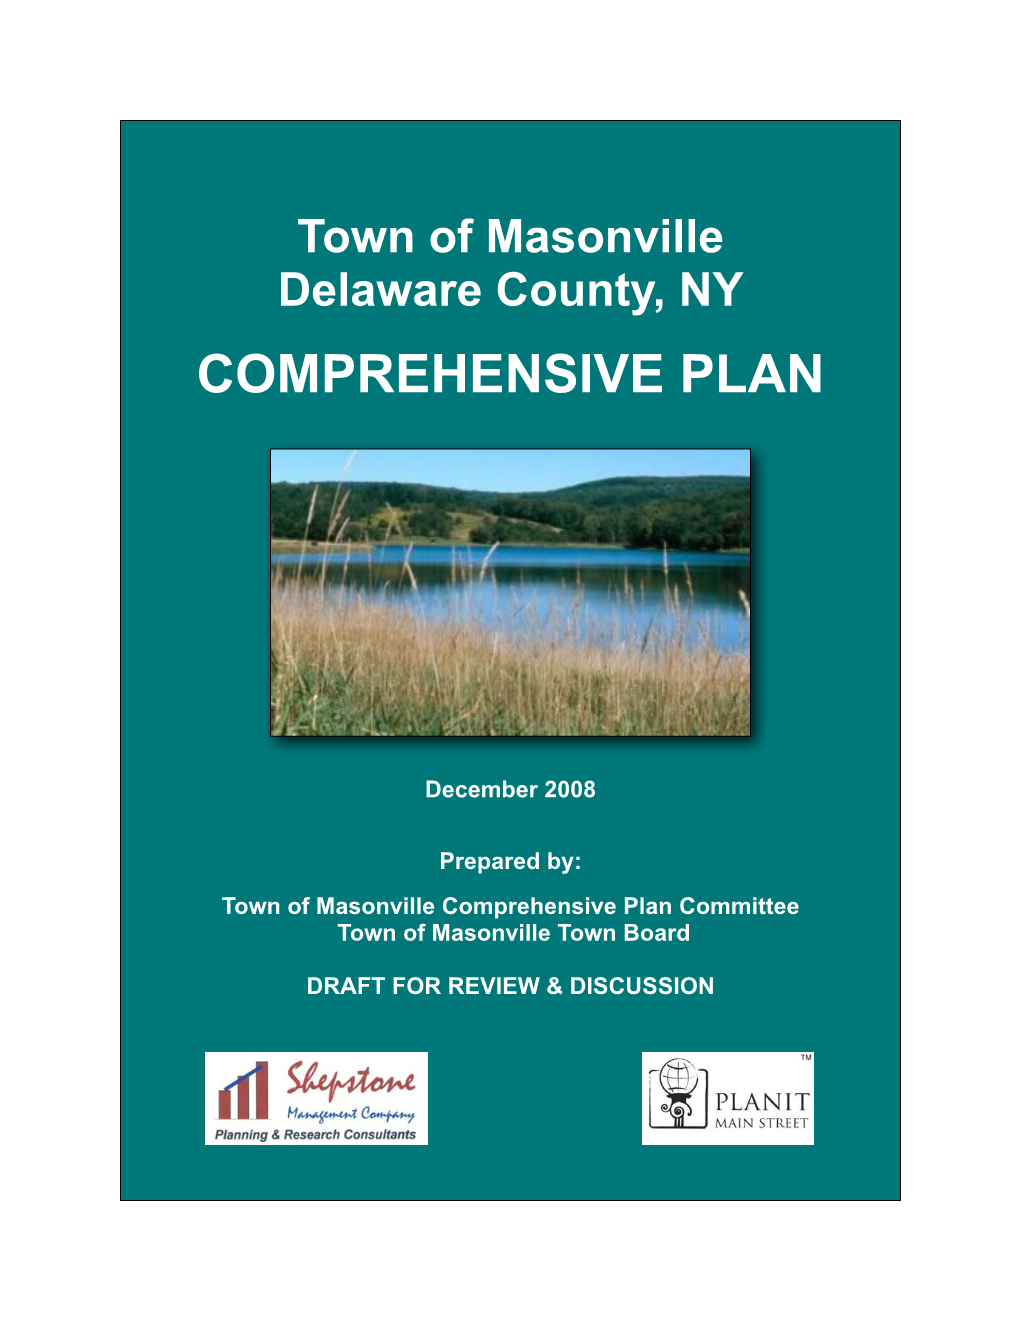 Town of Masonville Comprehensive Plan Committee Town of Masonville Town Board